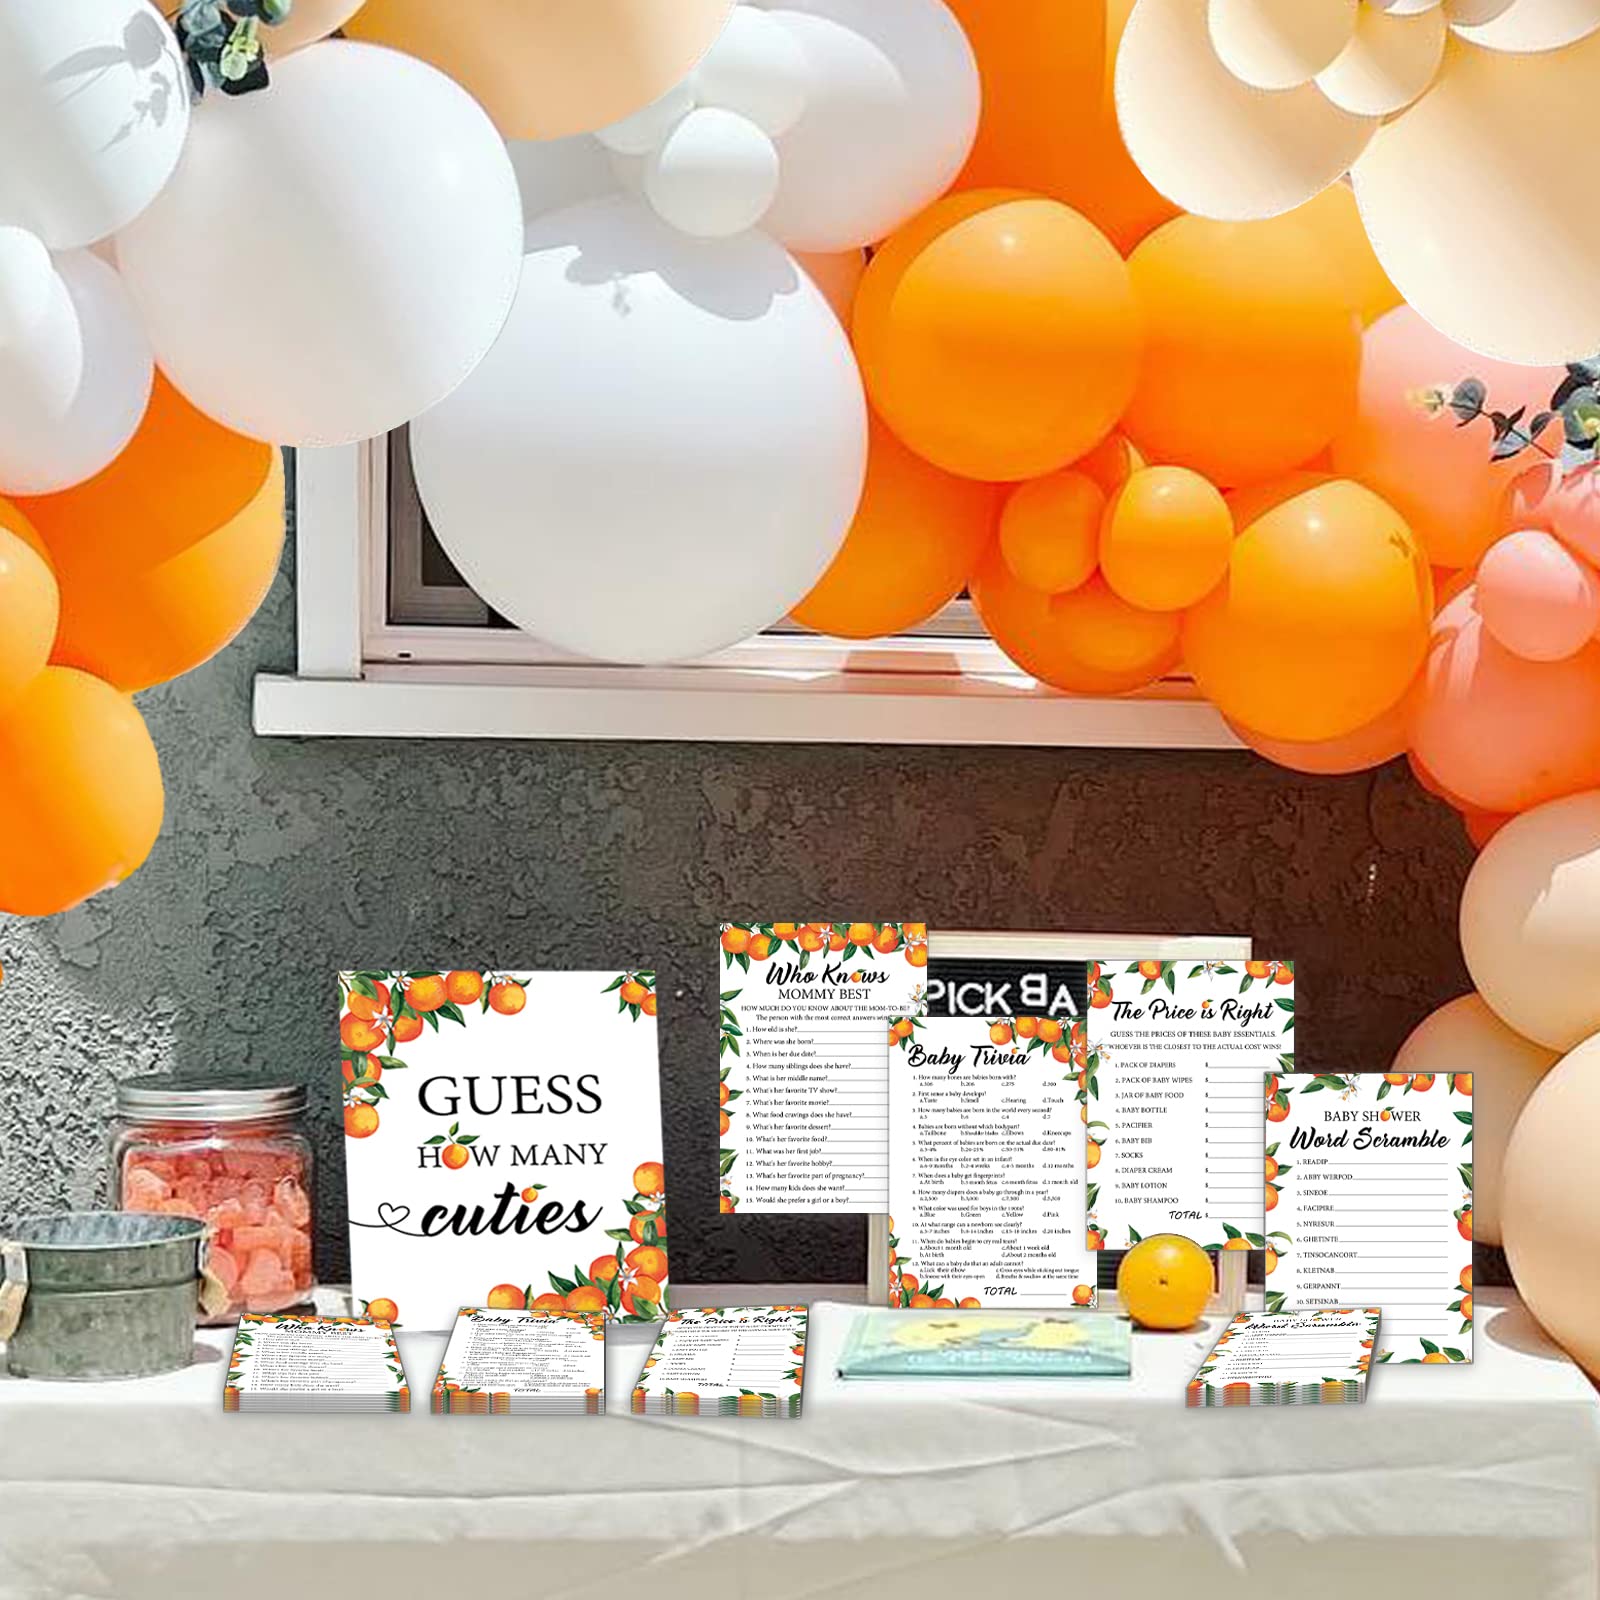 Little Cutie Orange Baby Shower Games, 4 Neutral Games, 50 Sheets Each, Fun Baby Shower Games Activities, Includes Who Knows Mommy Best, Baby Trivia, The Price is Right, and baby Word Scramble